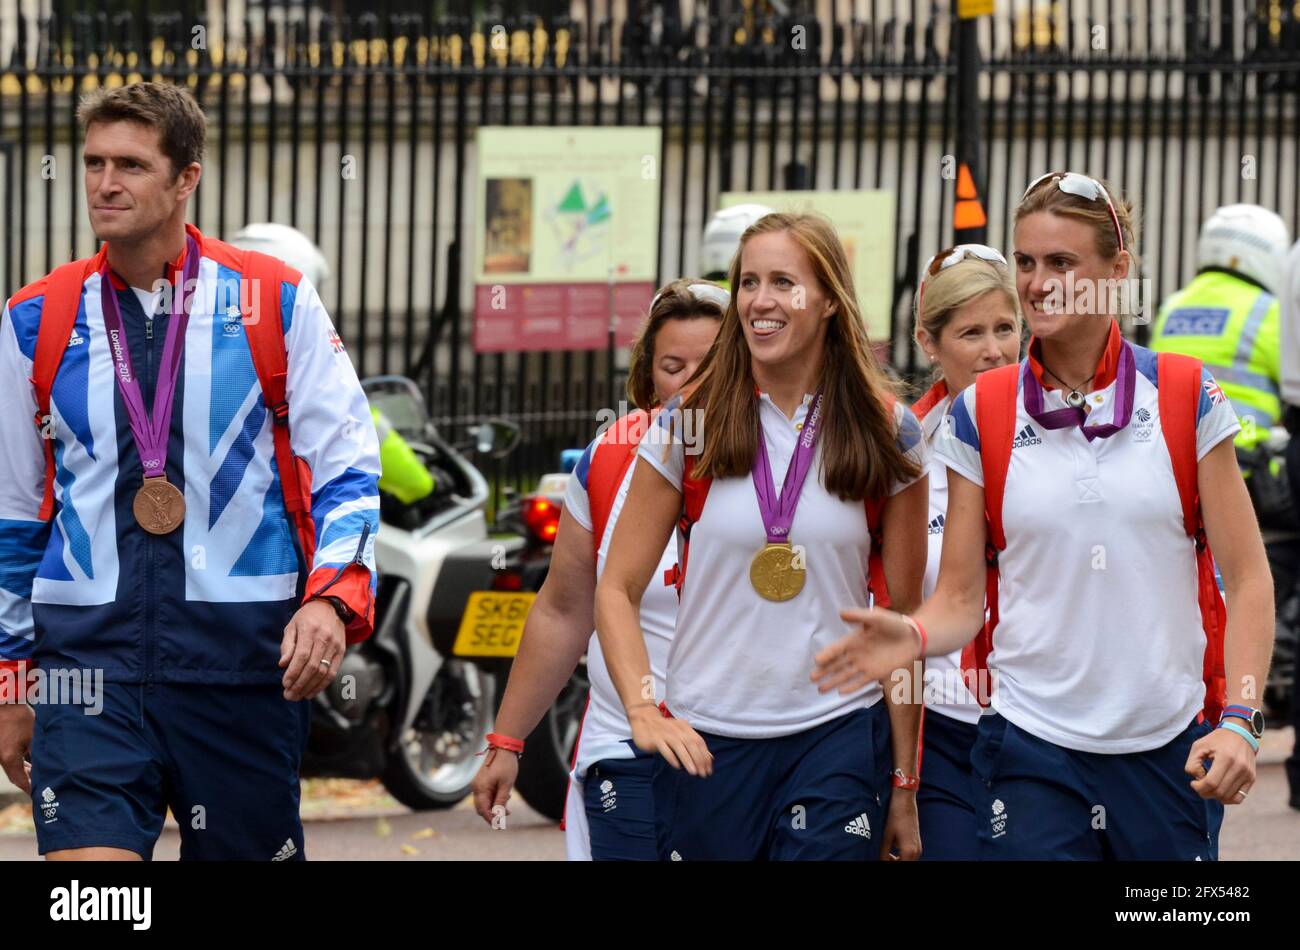 Team GB Olympians leaving Buckingham Palace after the parade. London 2012 Olympics. Greg Searle, Helen Glover and Heather Stanning with medals Stock Photo